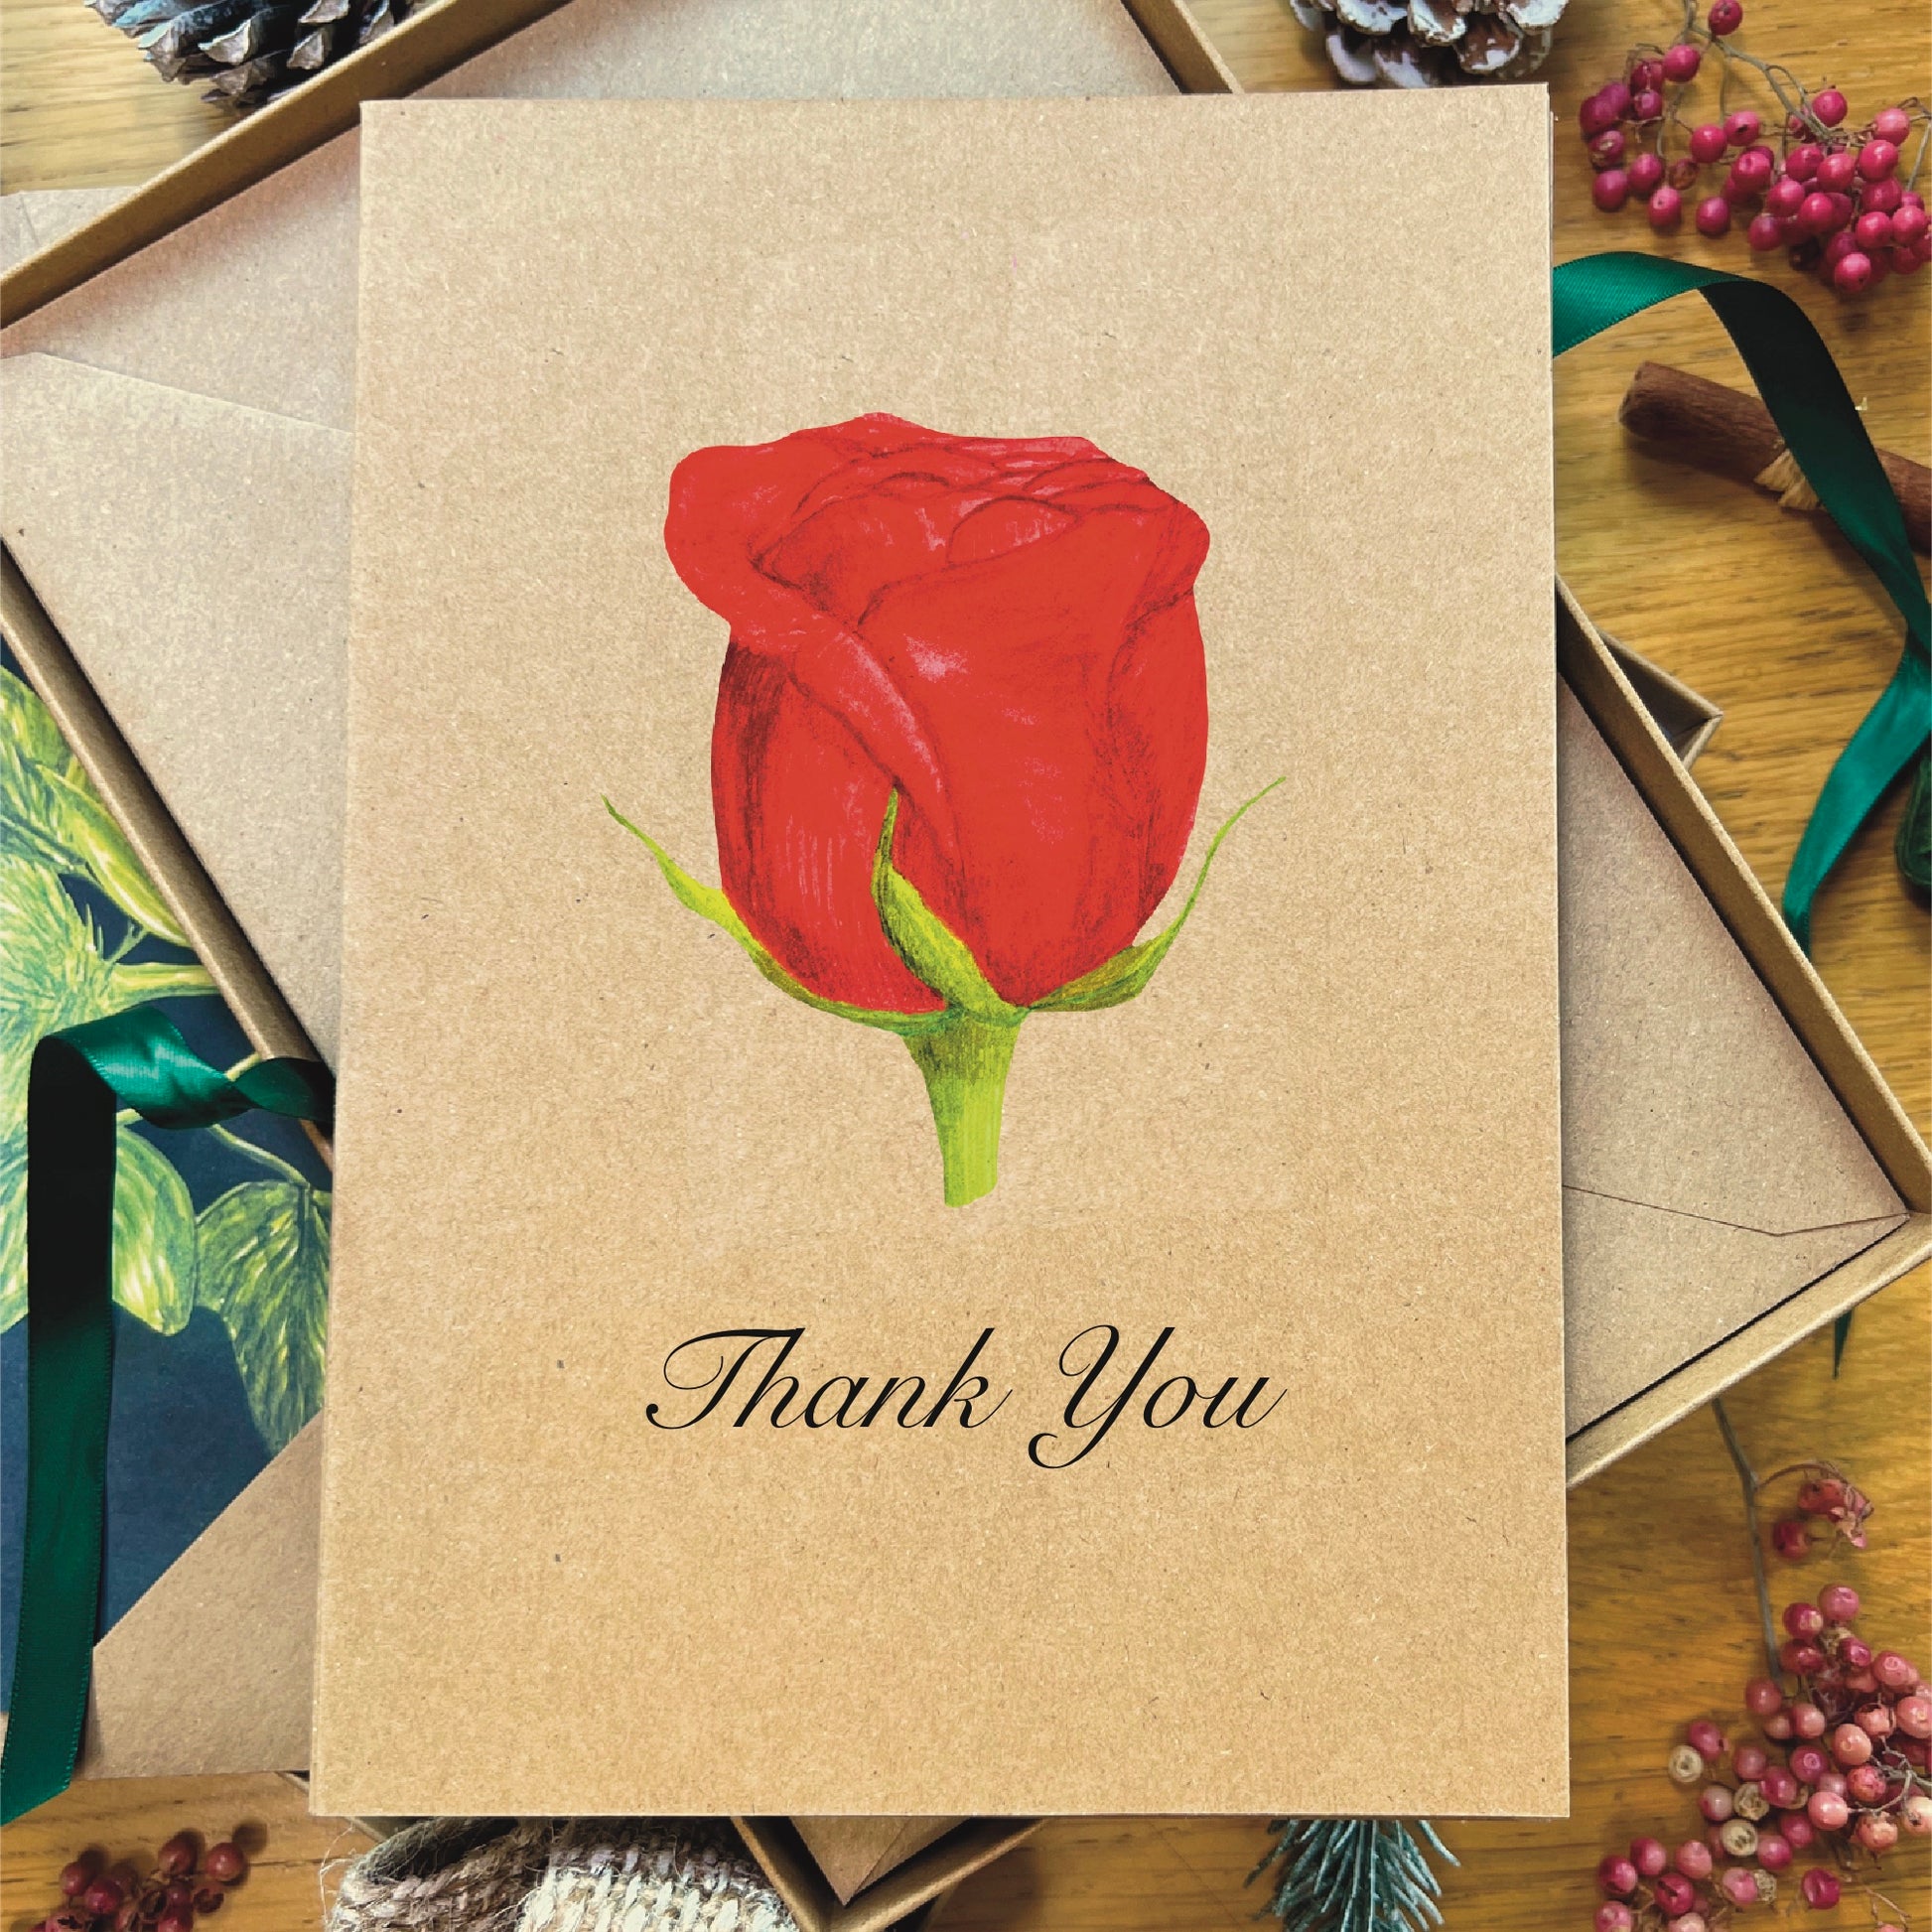 Red hybrid tea rose painted in watercolour attached to a natural recycled blank greetings card, laying in a box with an illustrated inlay envelope with Thank You written in script underneath the rose